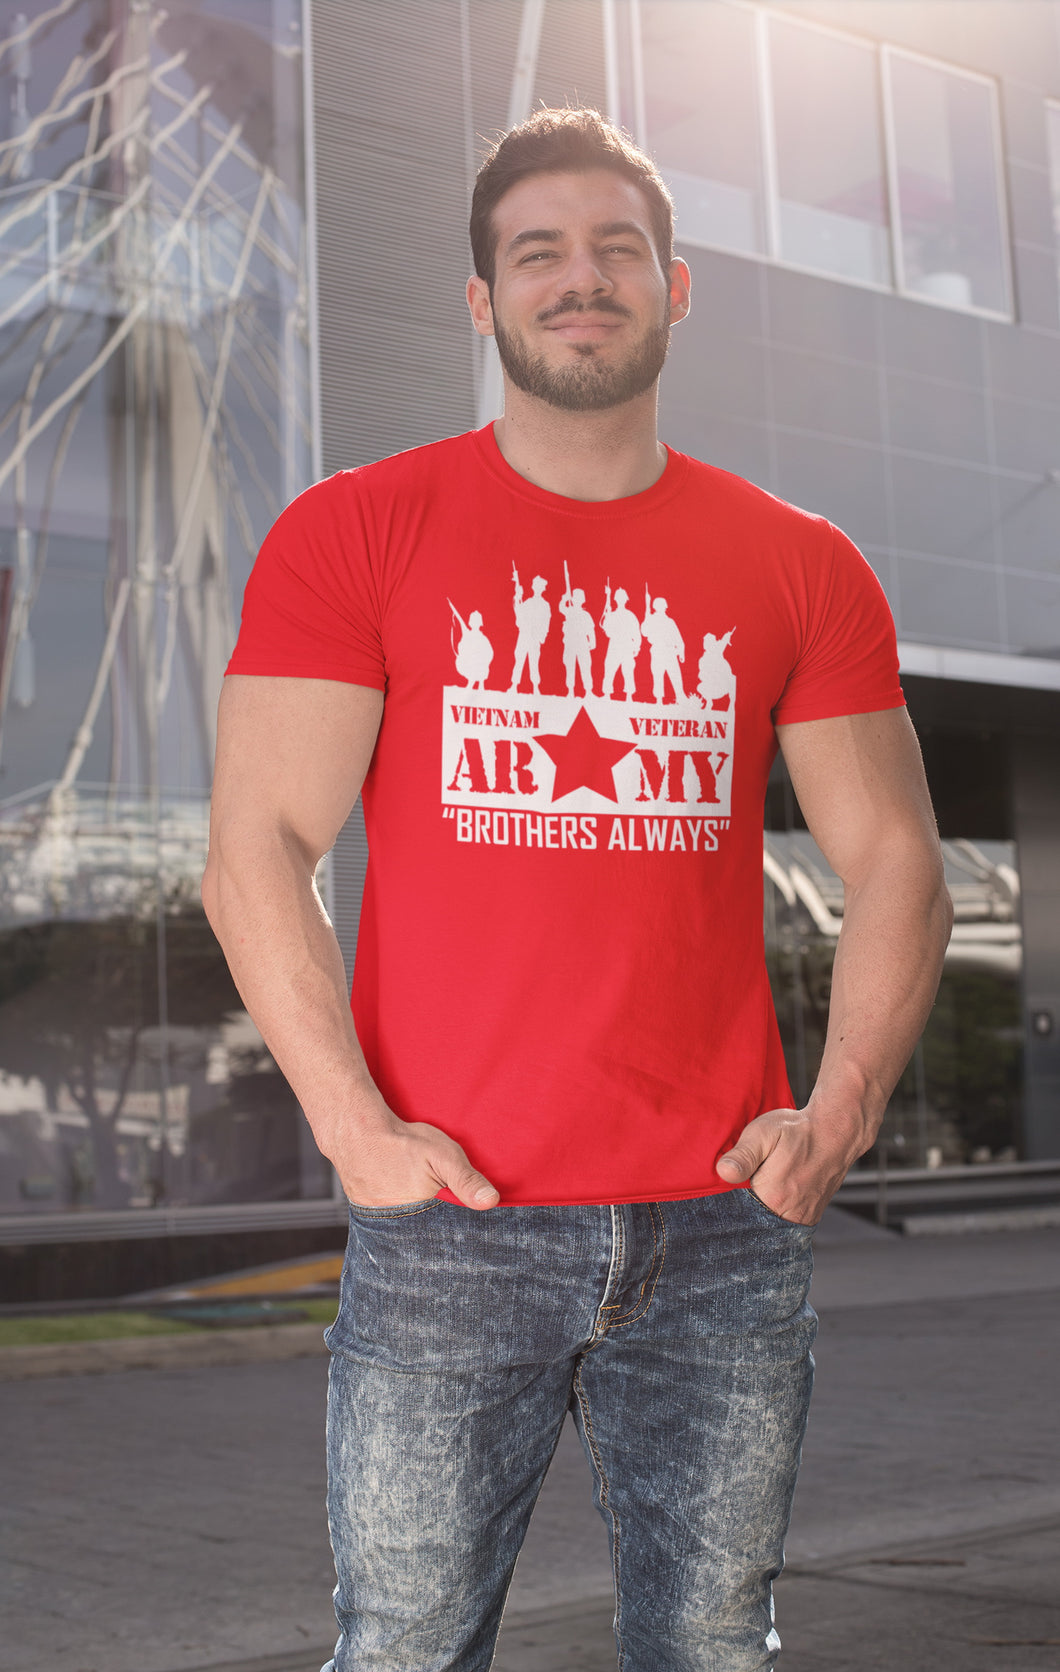 Veteran Army Brothers Always T-shirt